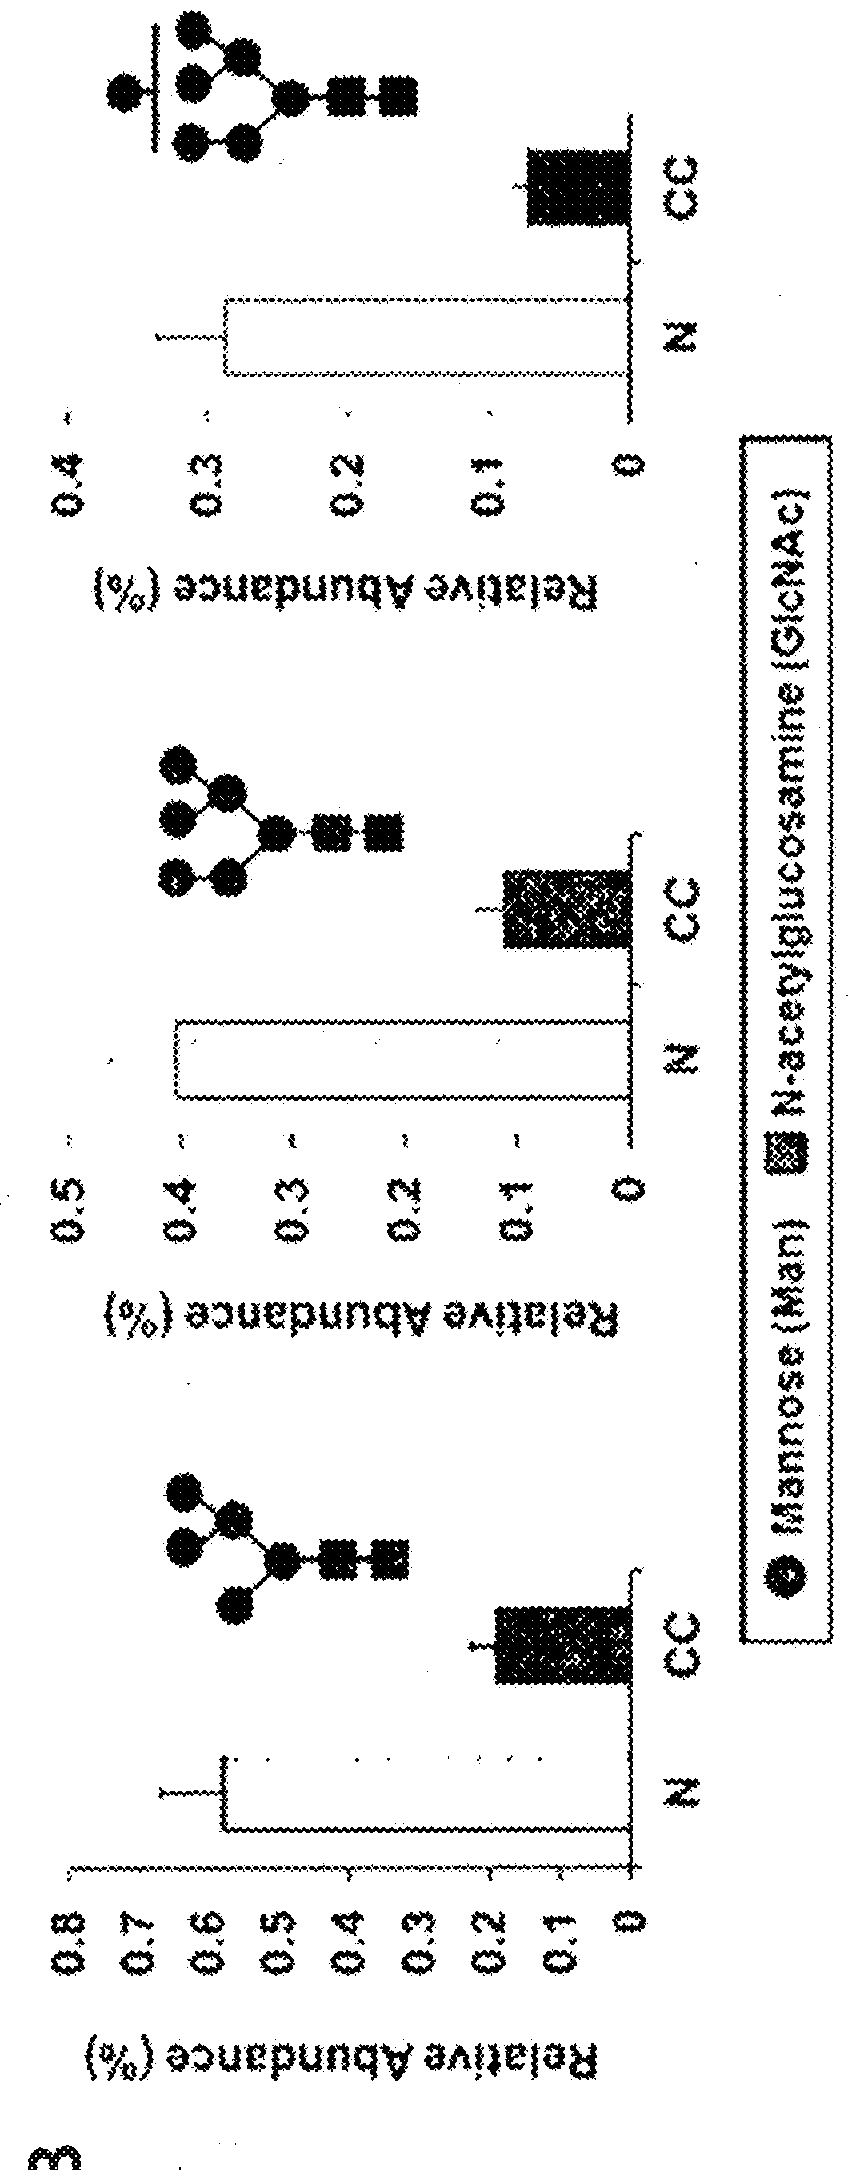 Method for diagnosis of colorectal cancer using mass spectrometry of n-glycans